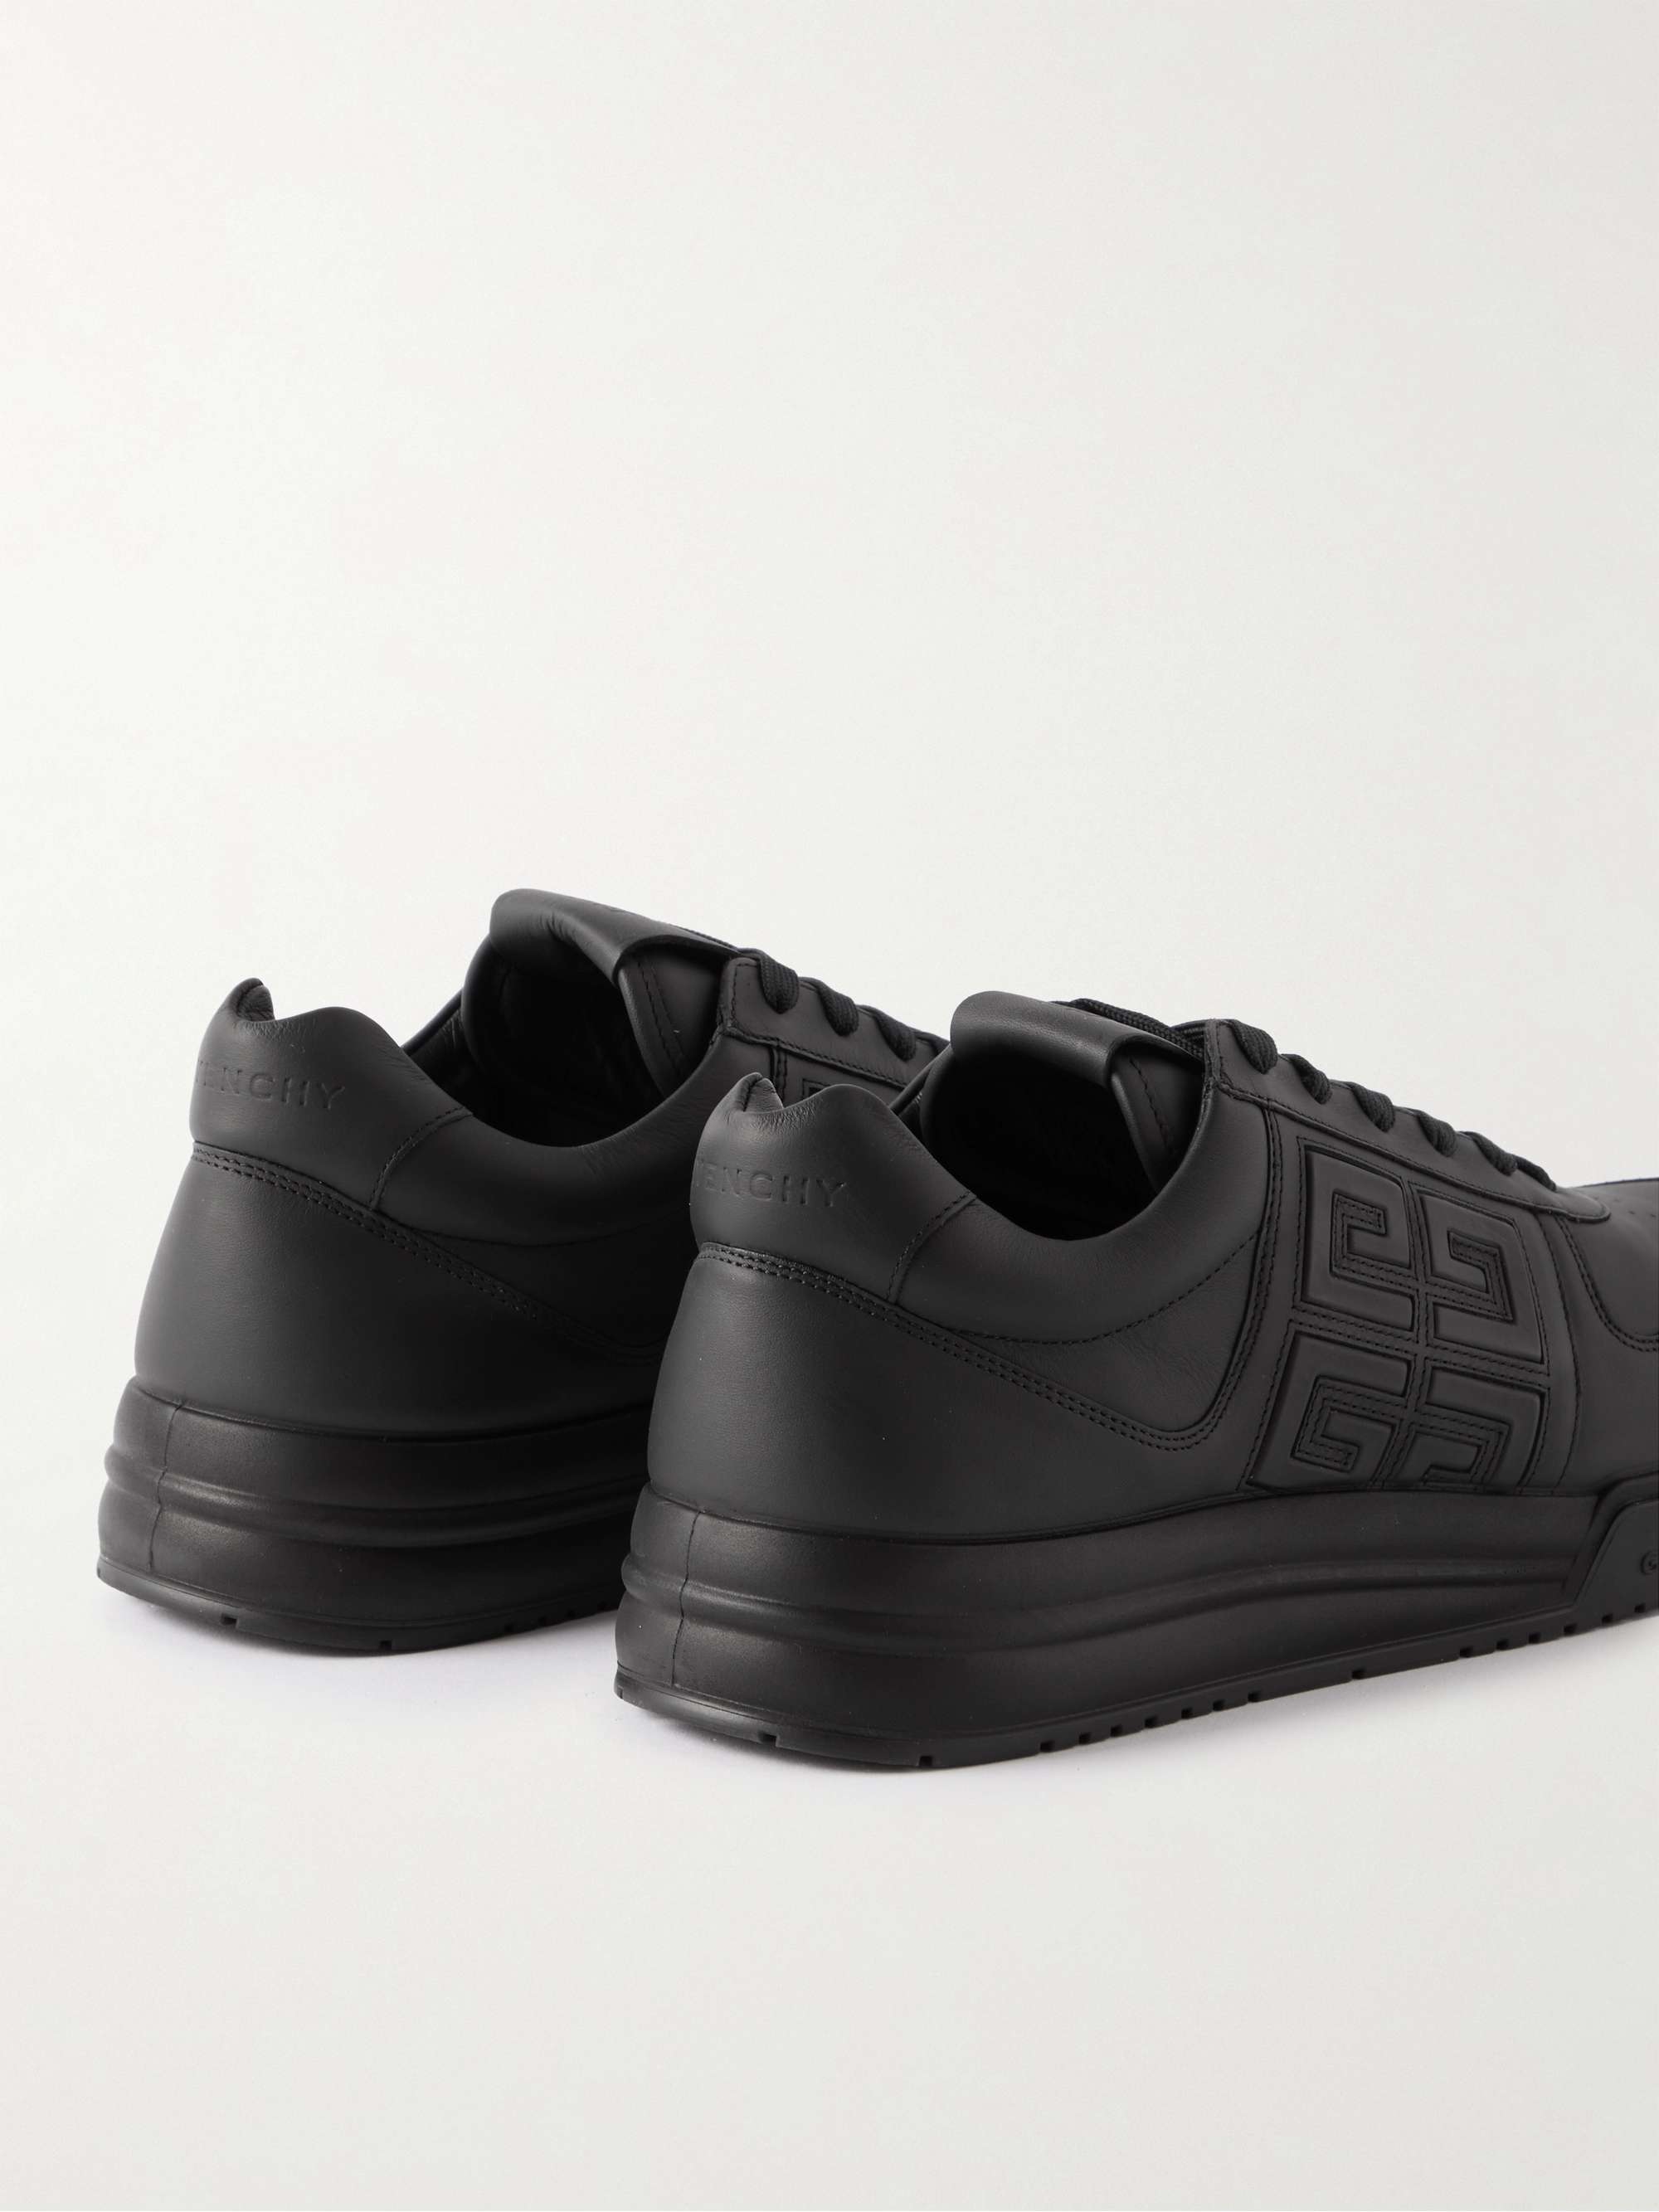 Black G4 Logo-Embossed Leather Sneakers | GIVENCHY | MR PORTER